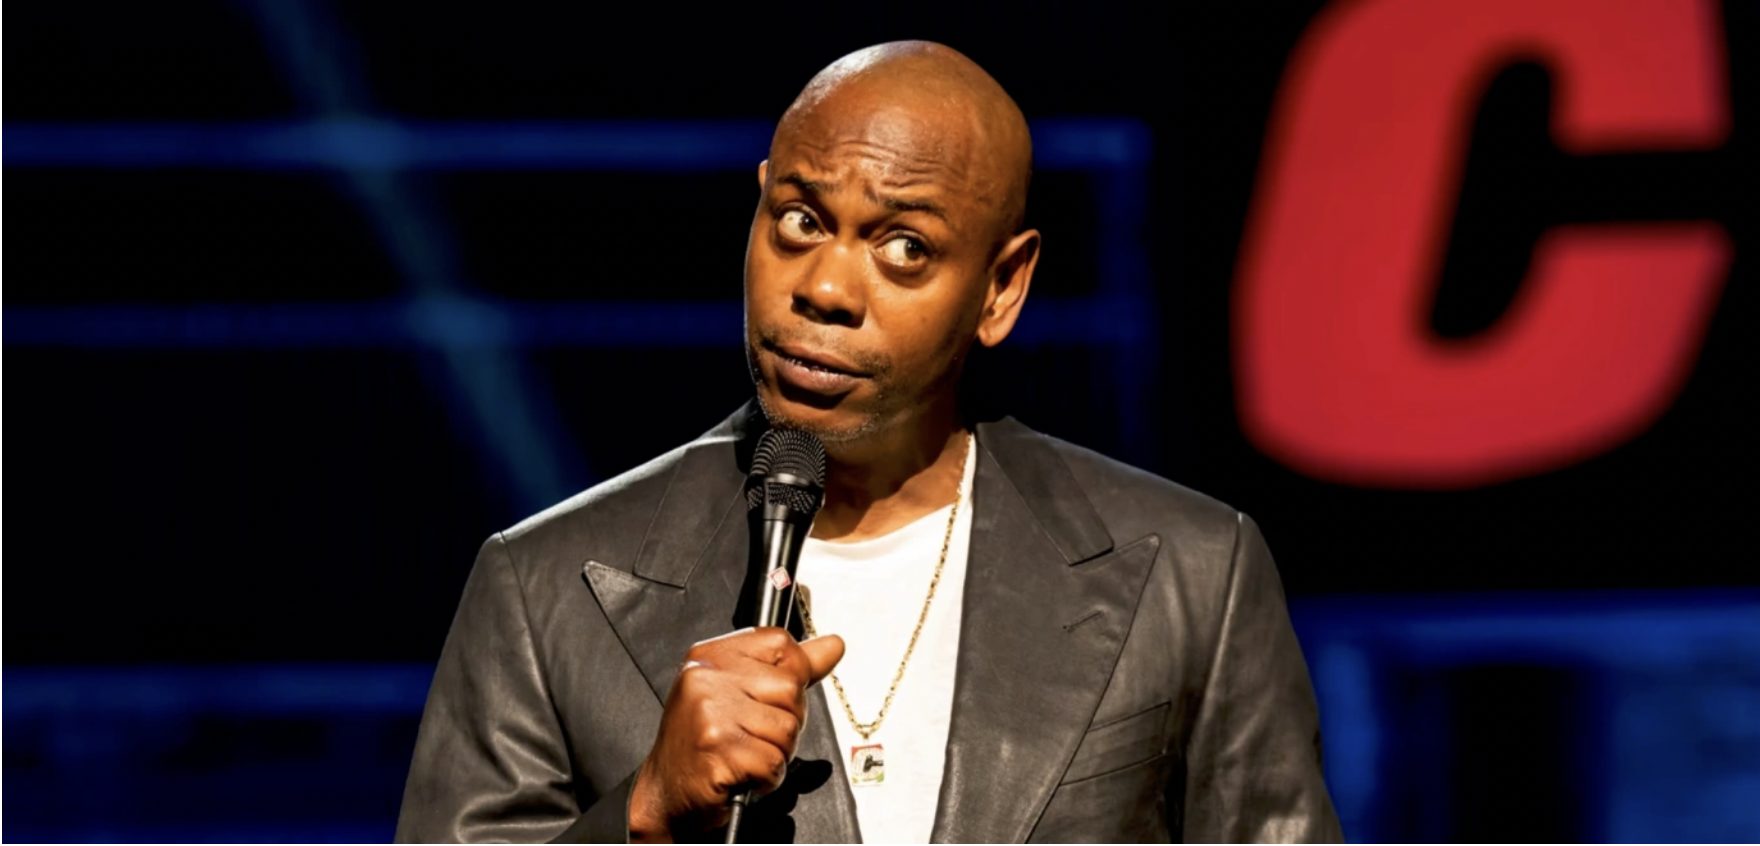 The Guy List: Dave Chappelle